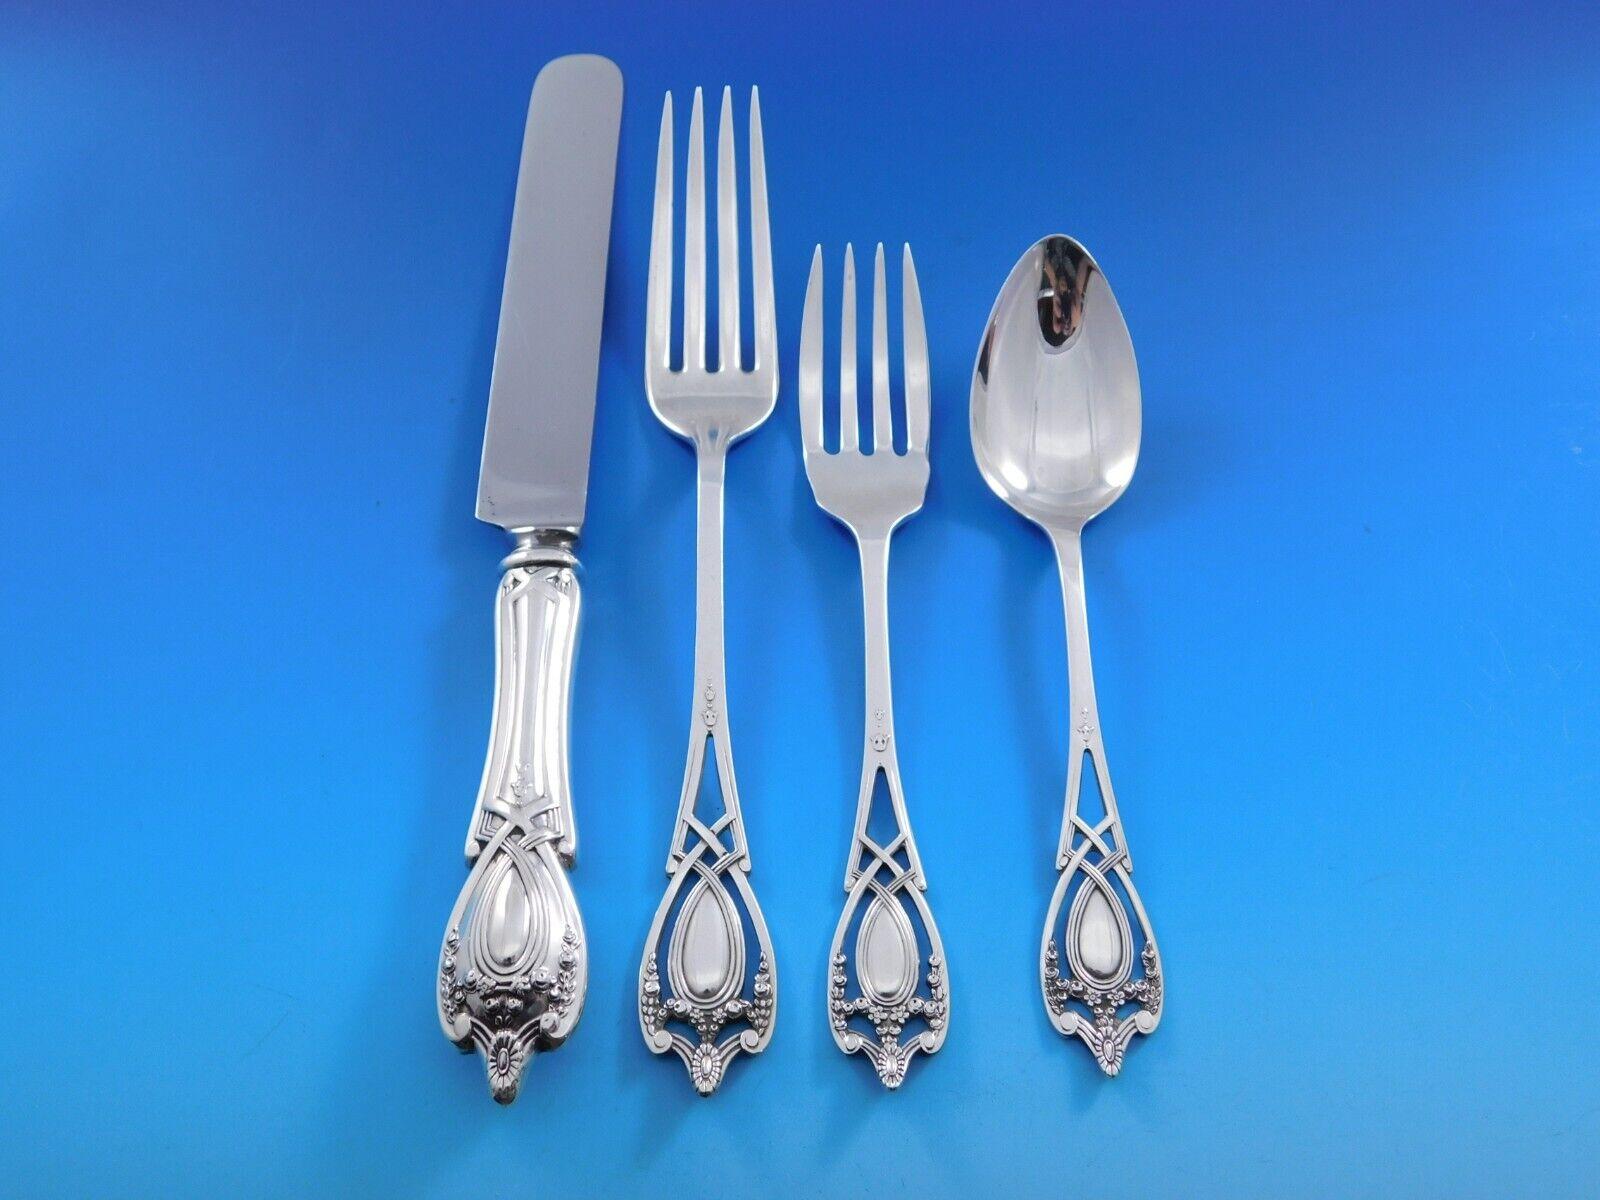 Monticello by Lunt Sterling Silver Flatware set - 60 pieces. This set includes:

12 Knives w/ blunt stainless blades, 8 5/8